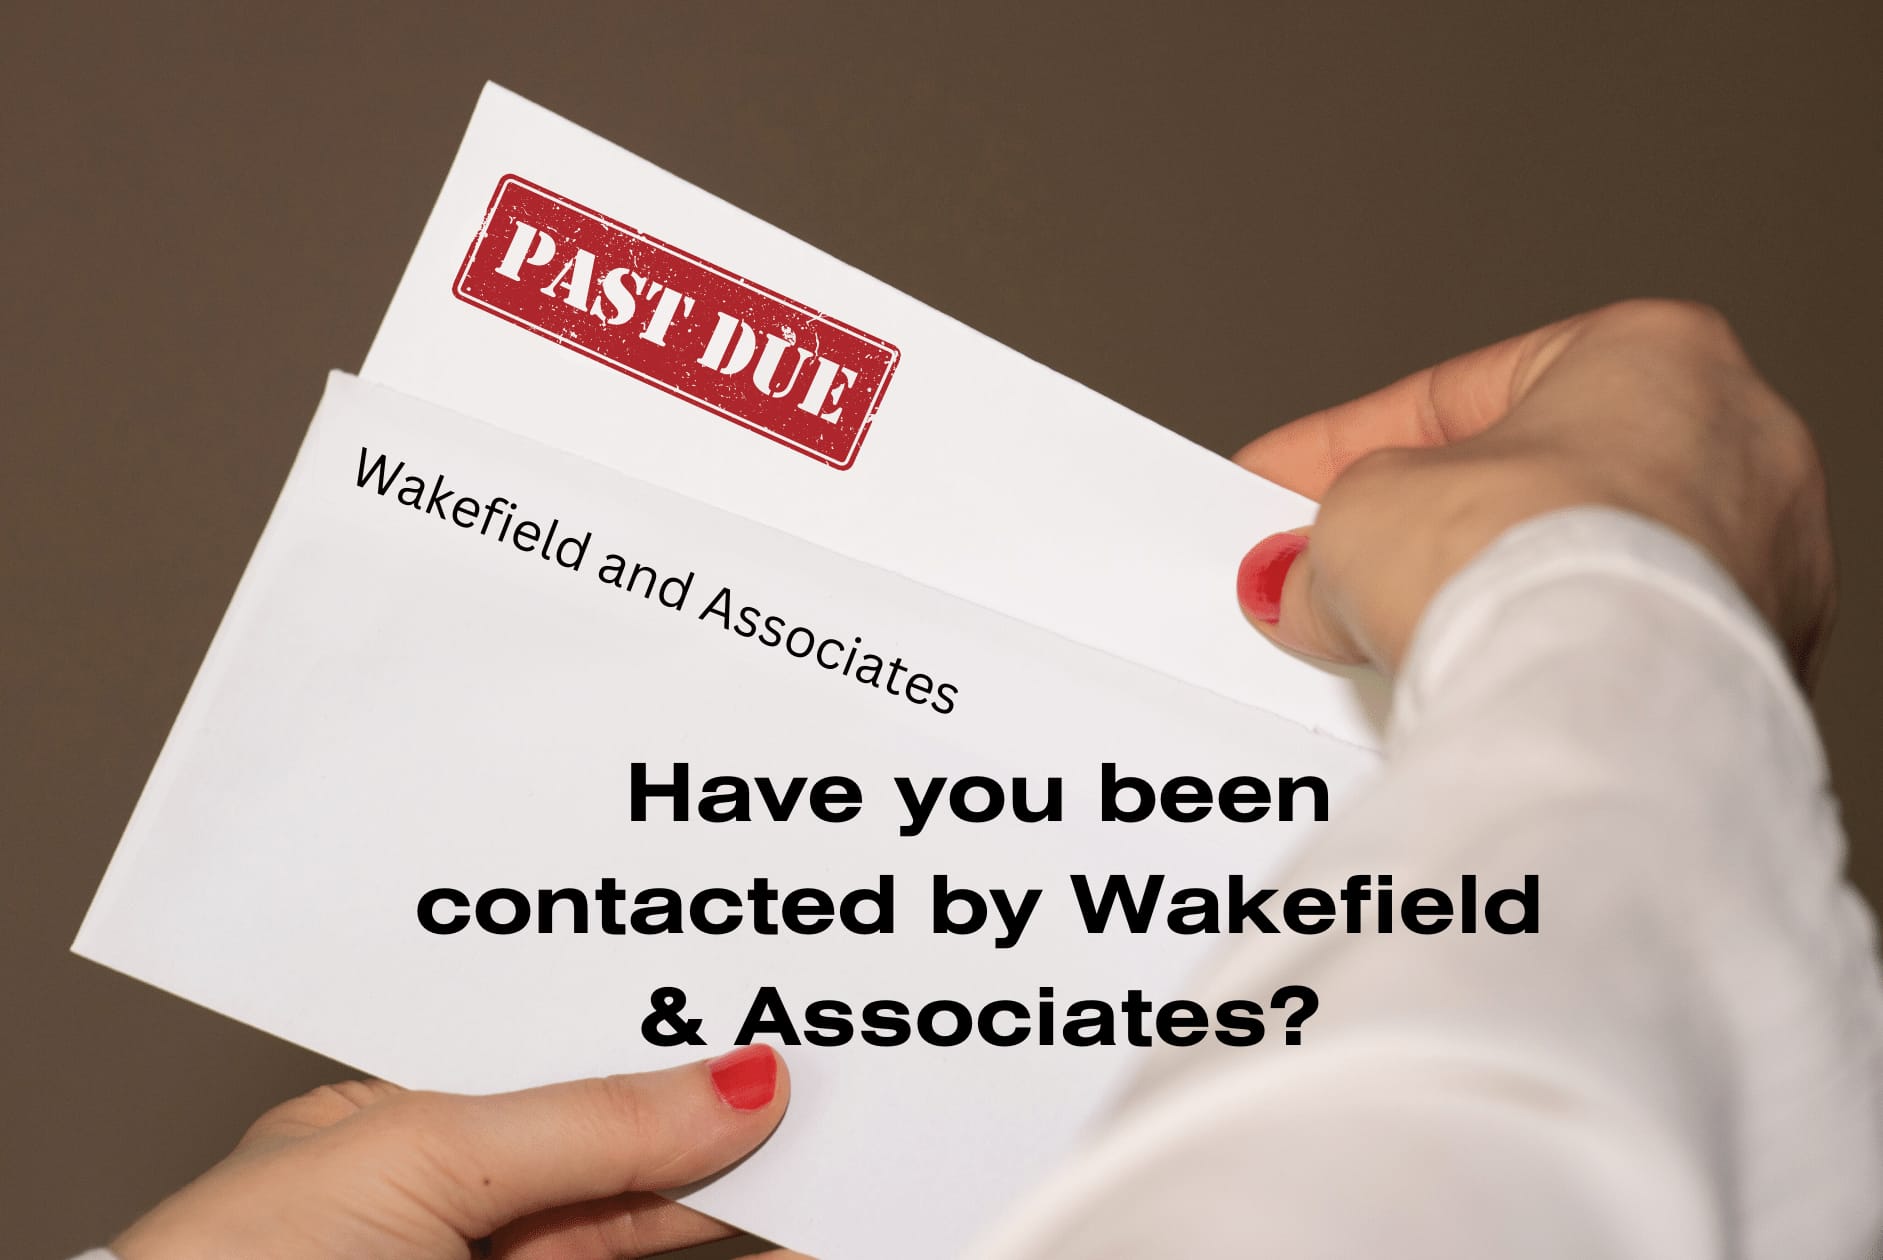 Wakefield & Associates debt collection letter received by consumer